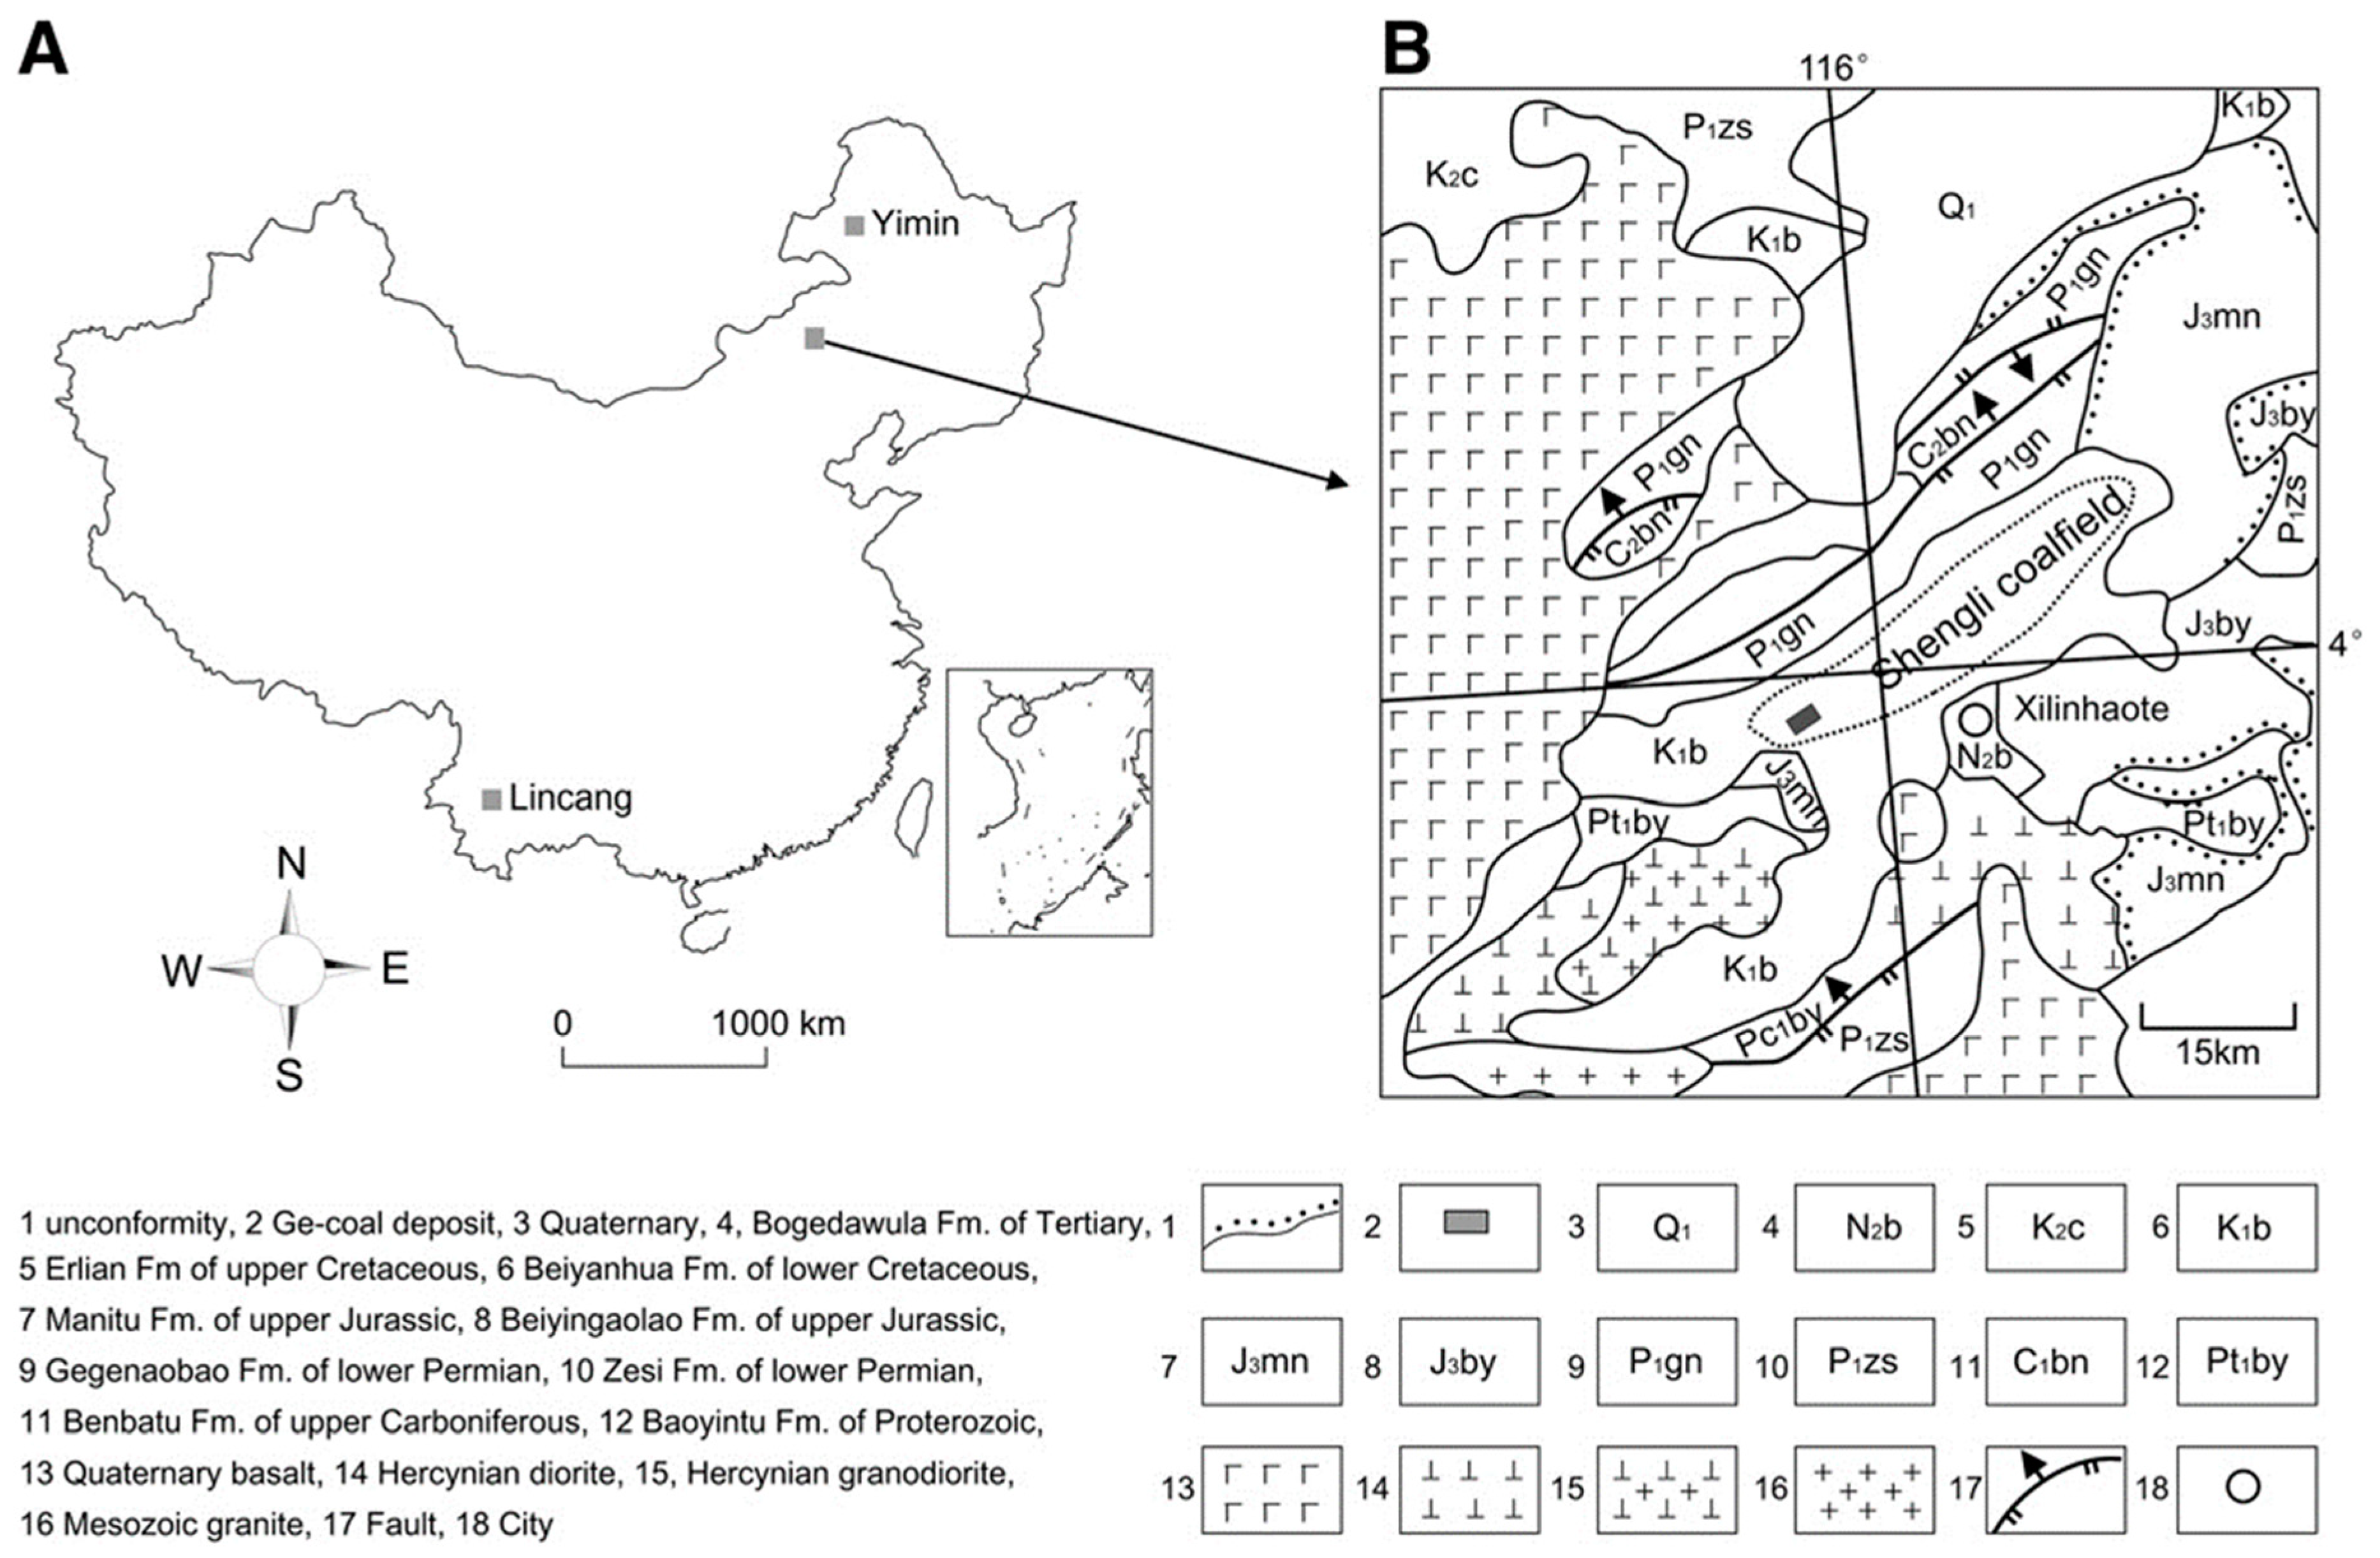 Selected samples. (a) a lignite sample in the Erlian Basin, (b) an